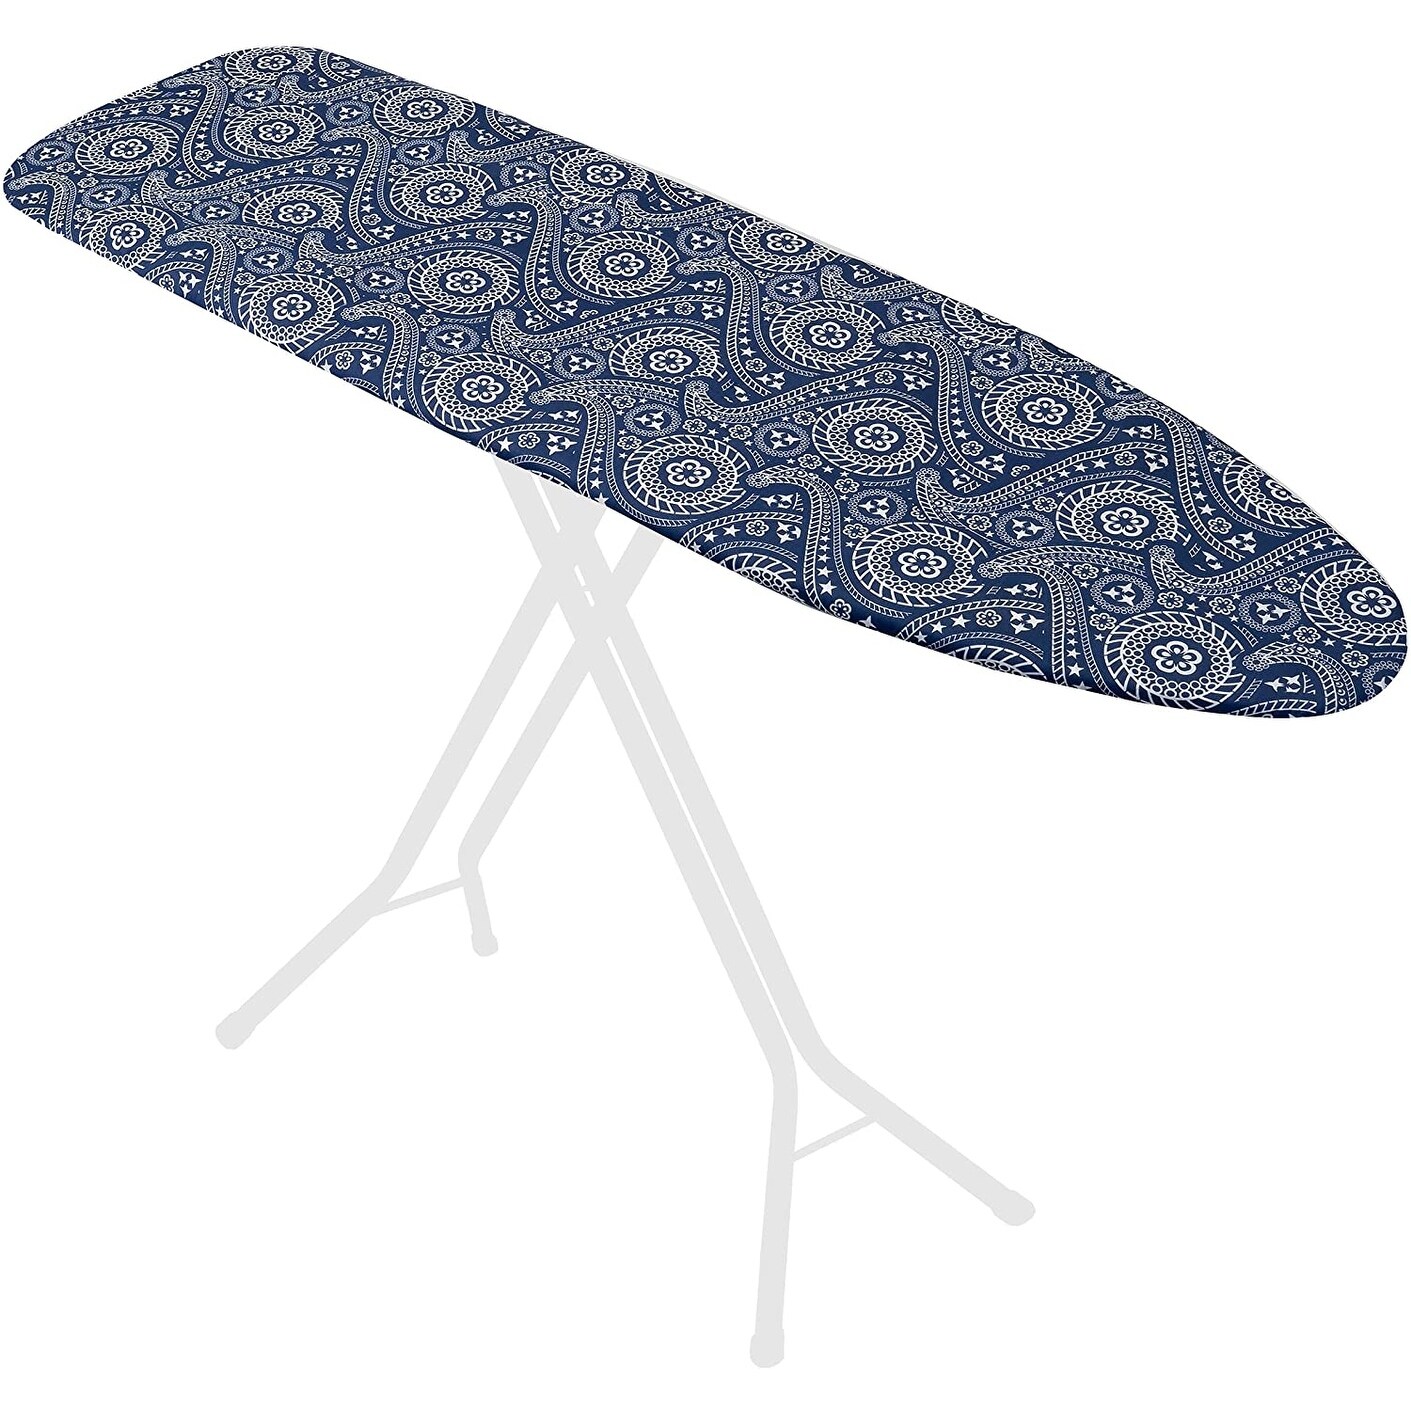 Ironing Boards - Bed Bath & Beyond